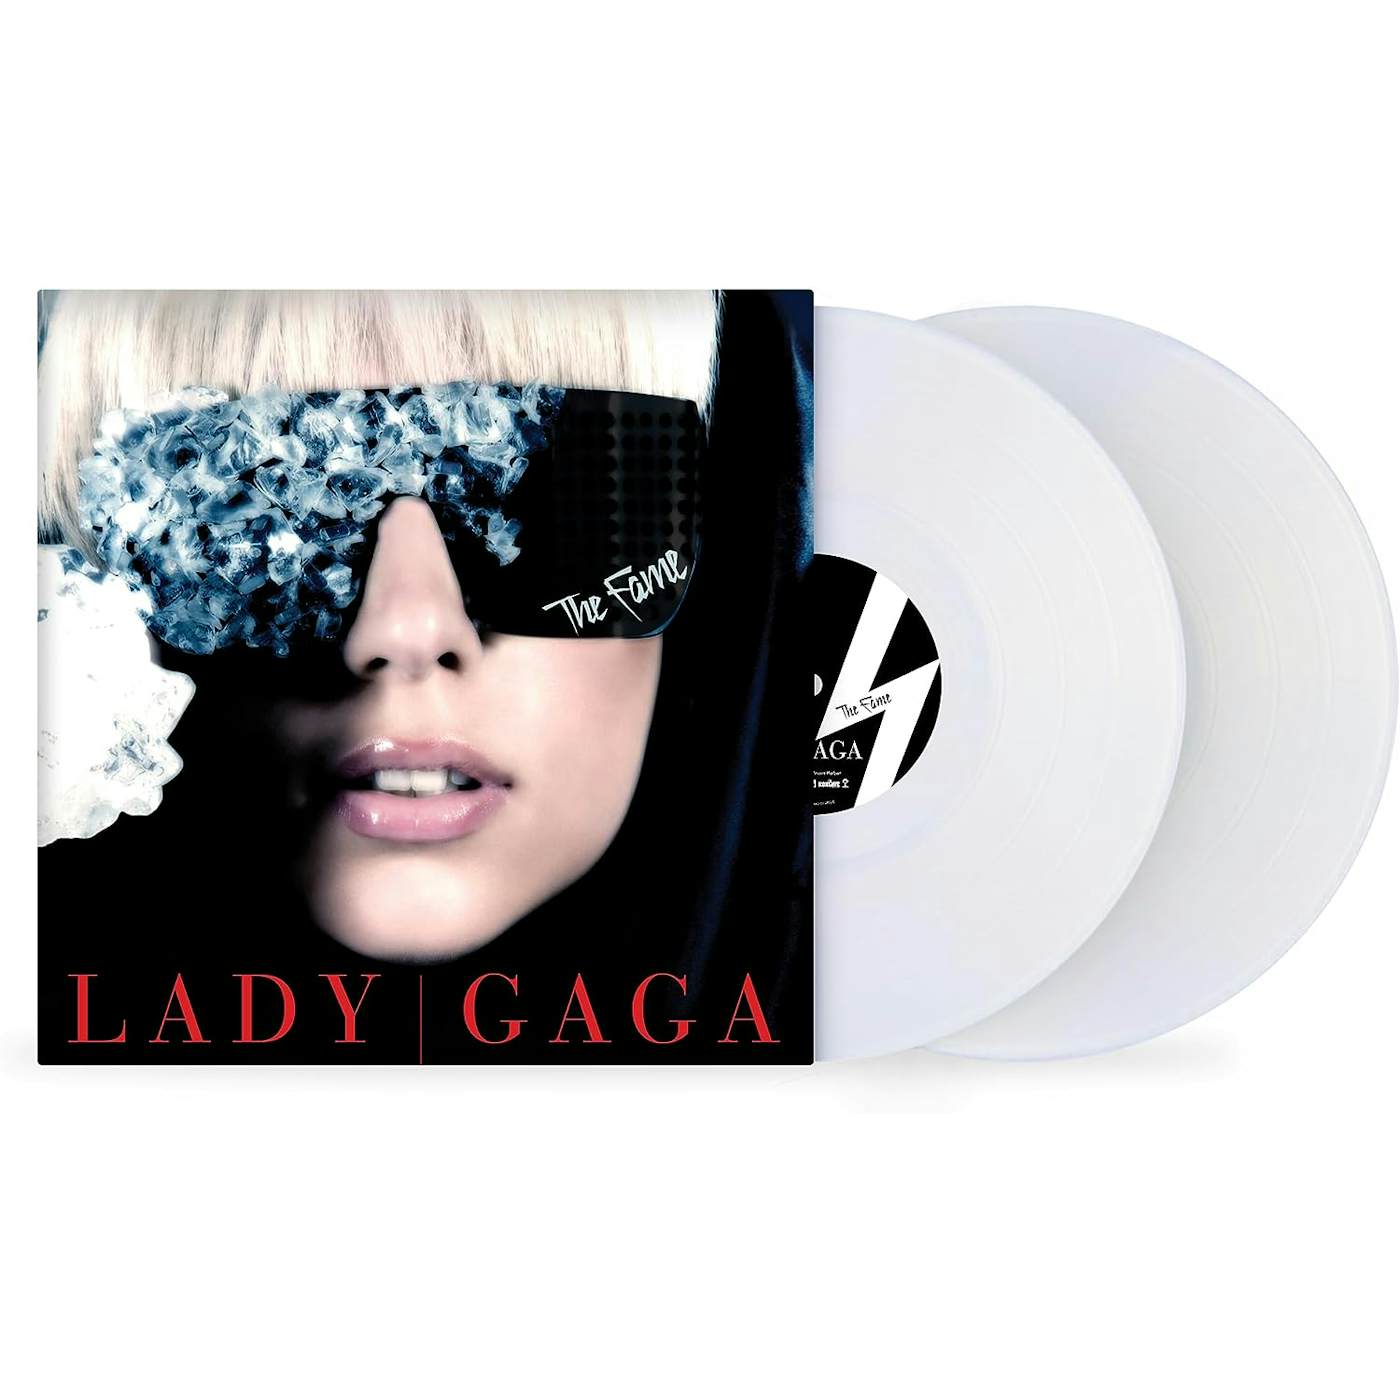 Lady Gaga FAME MONSTER (PICTURE DISC) Vinyl Record